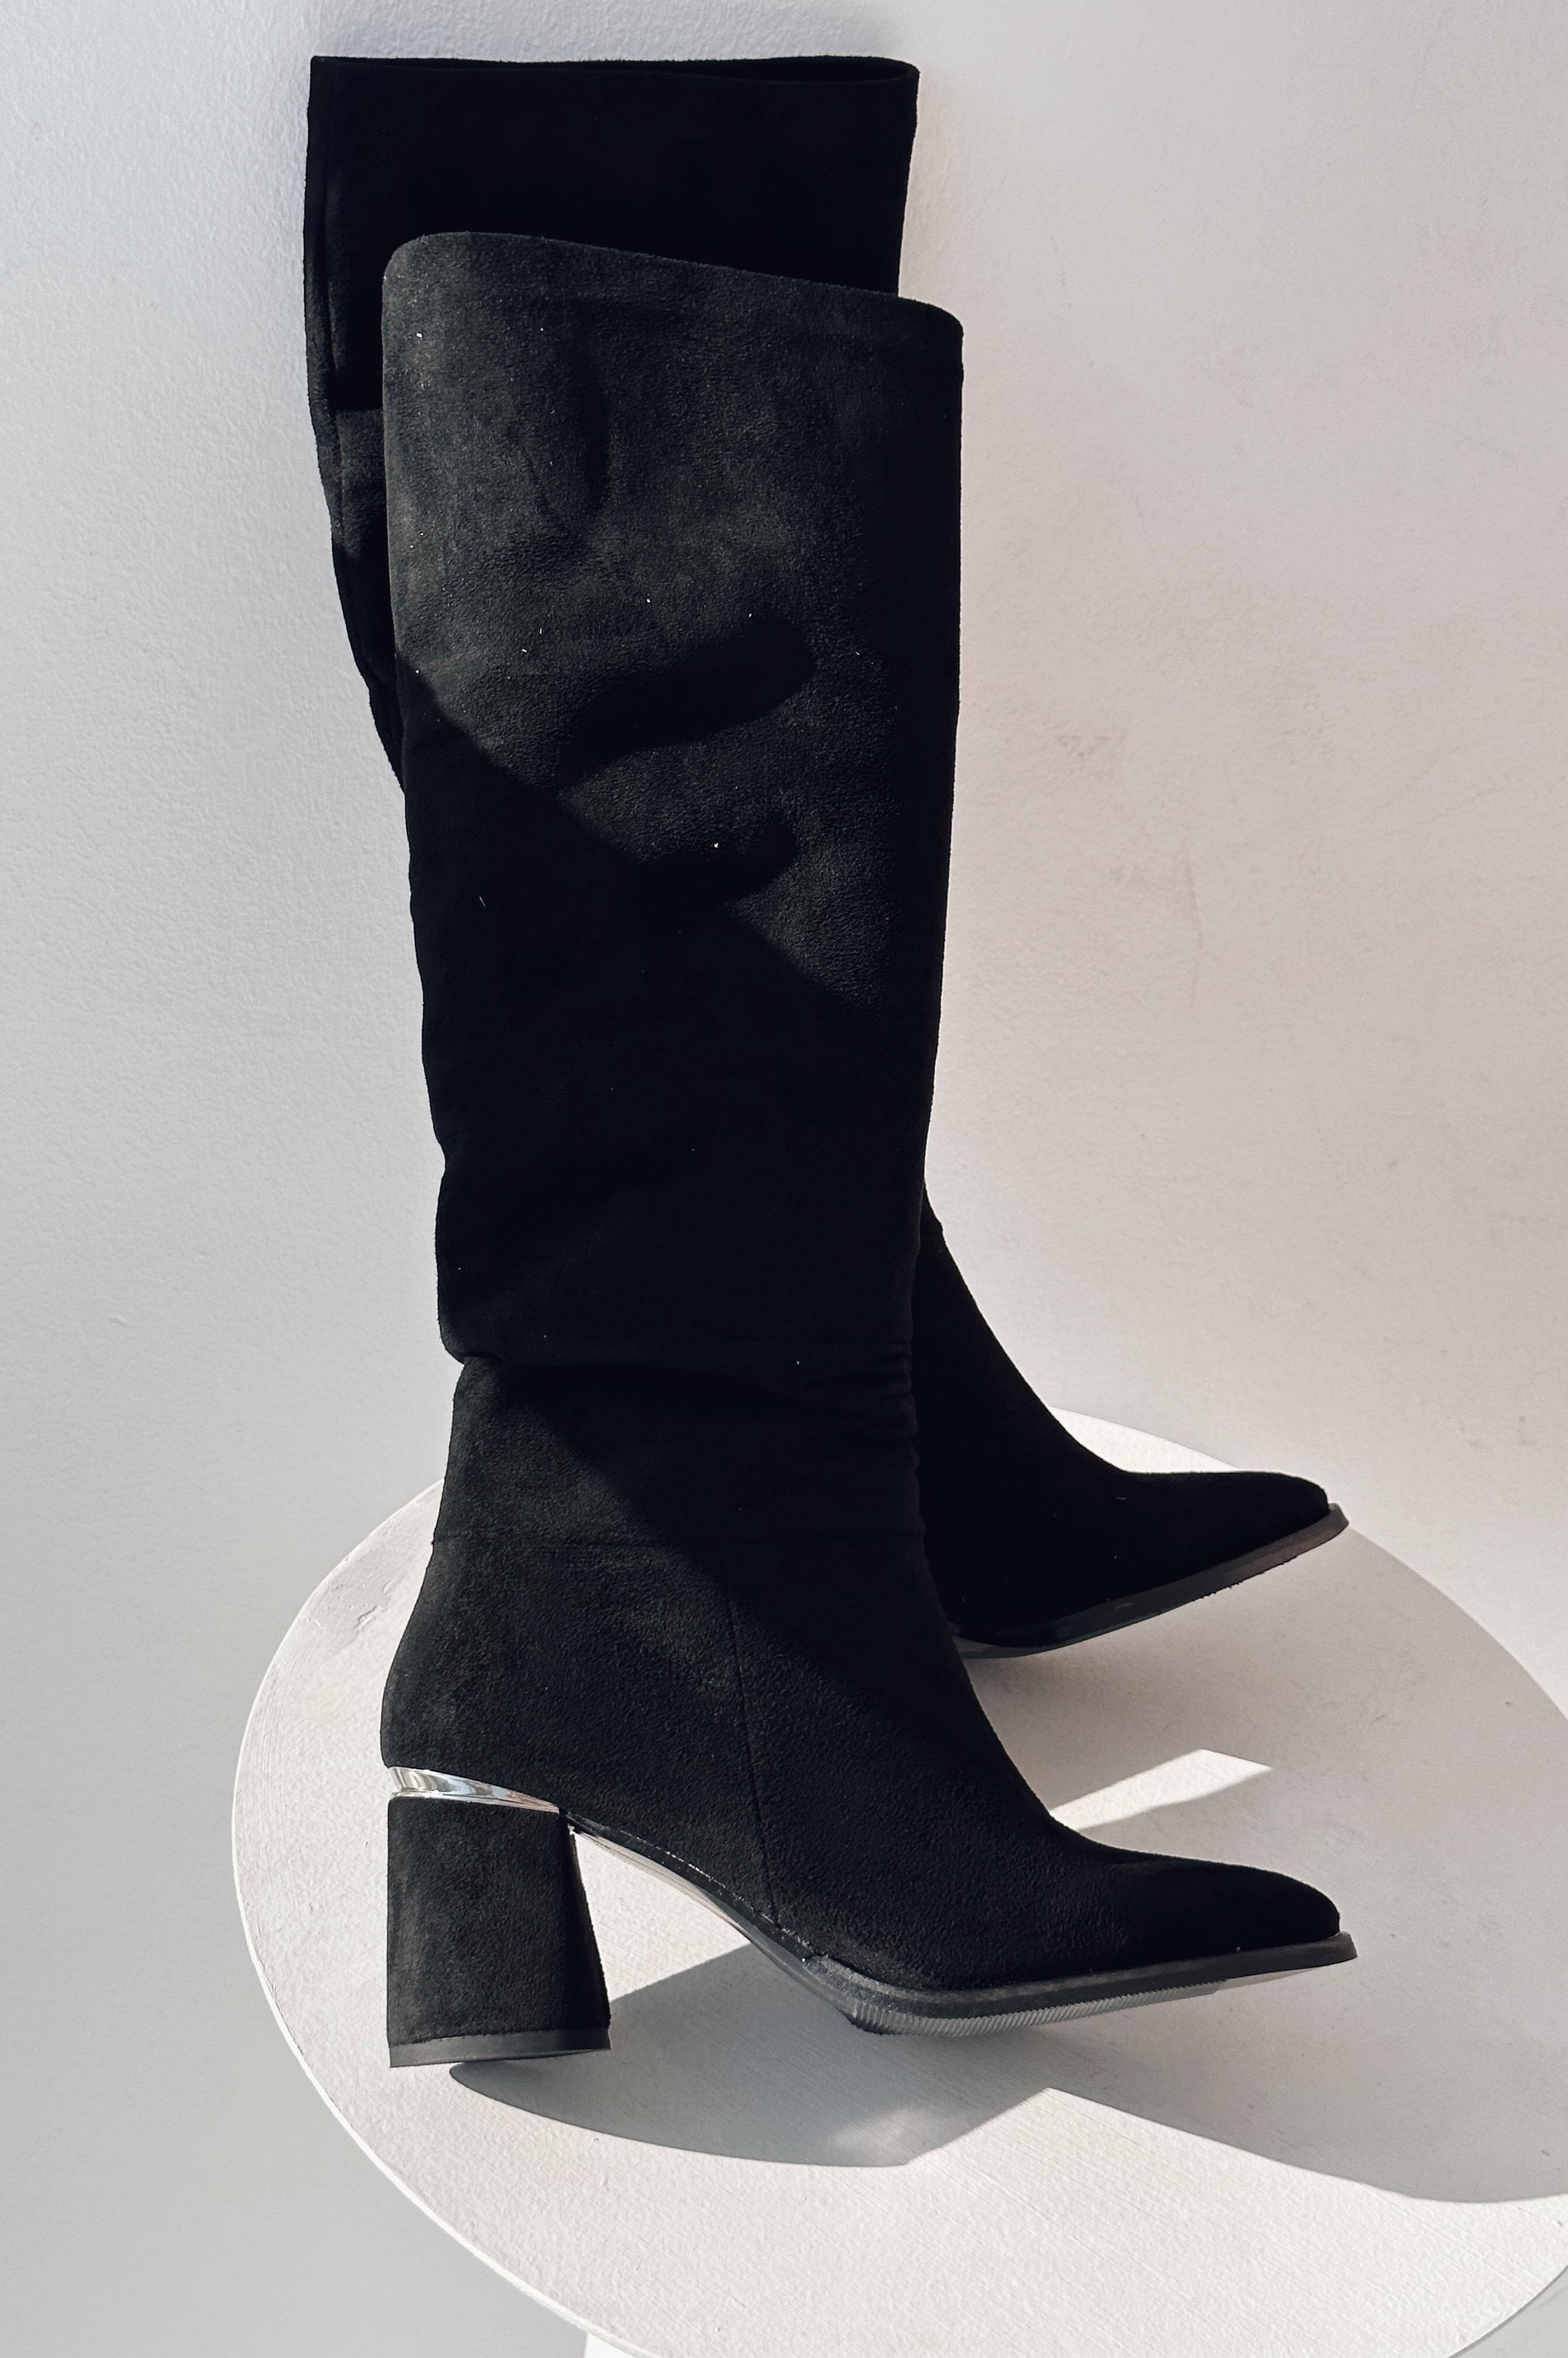 Votens suede bellows woman heeled boots black